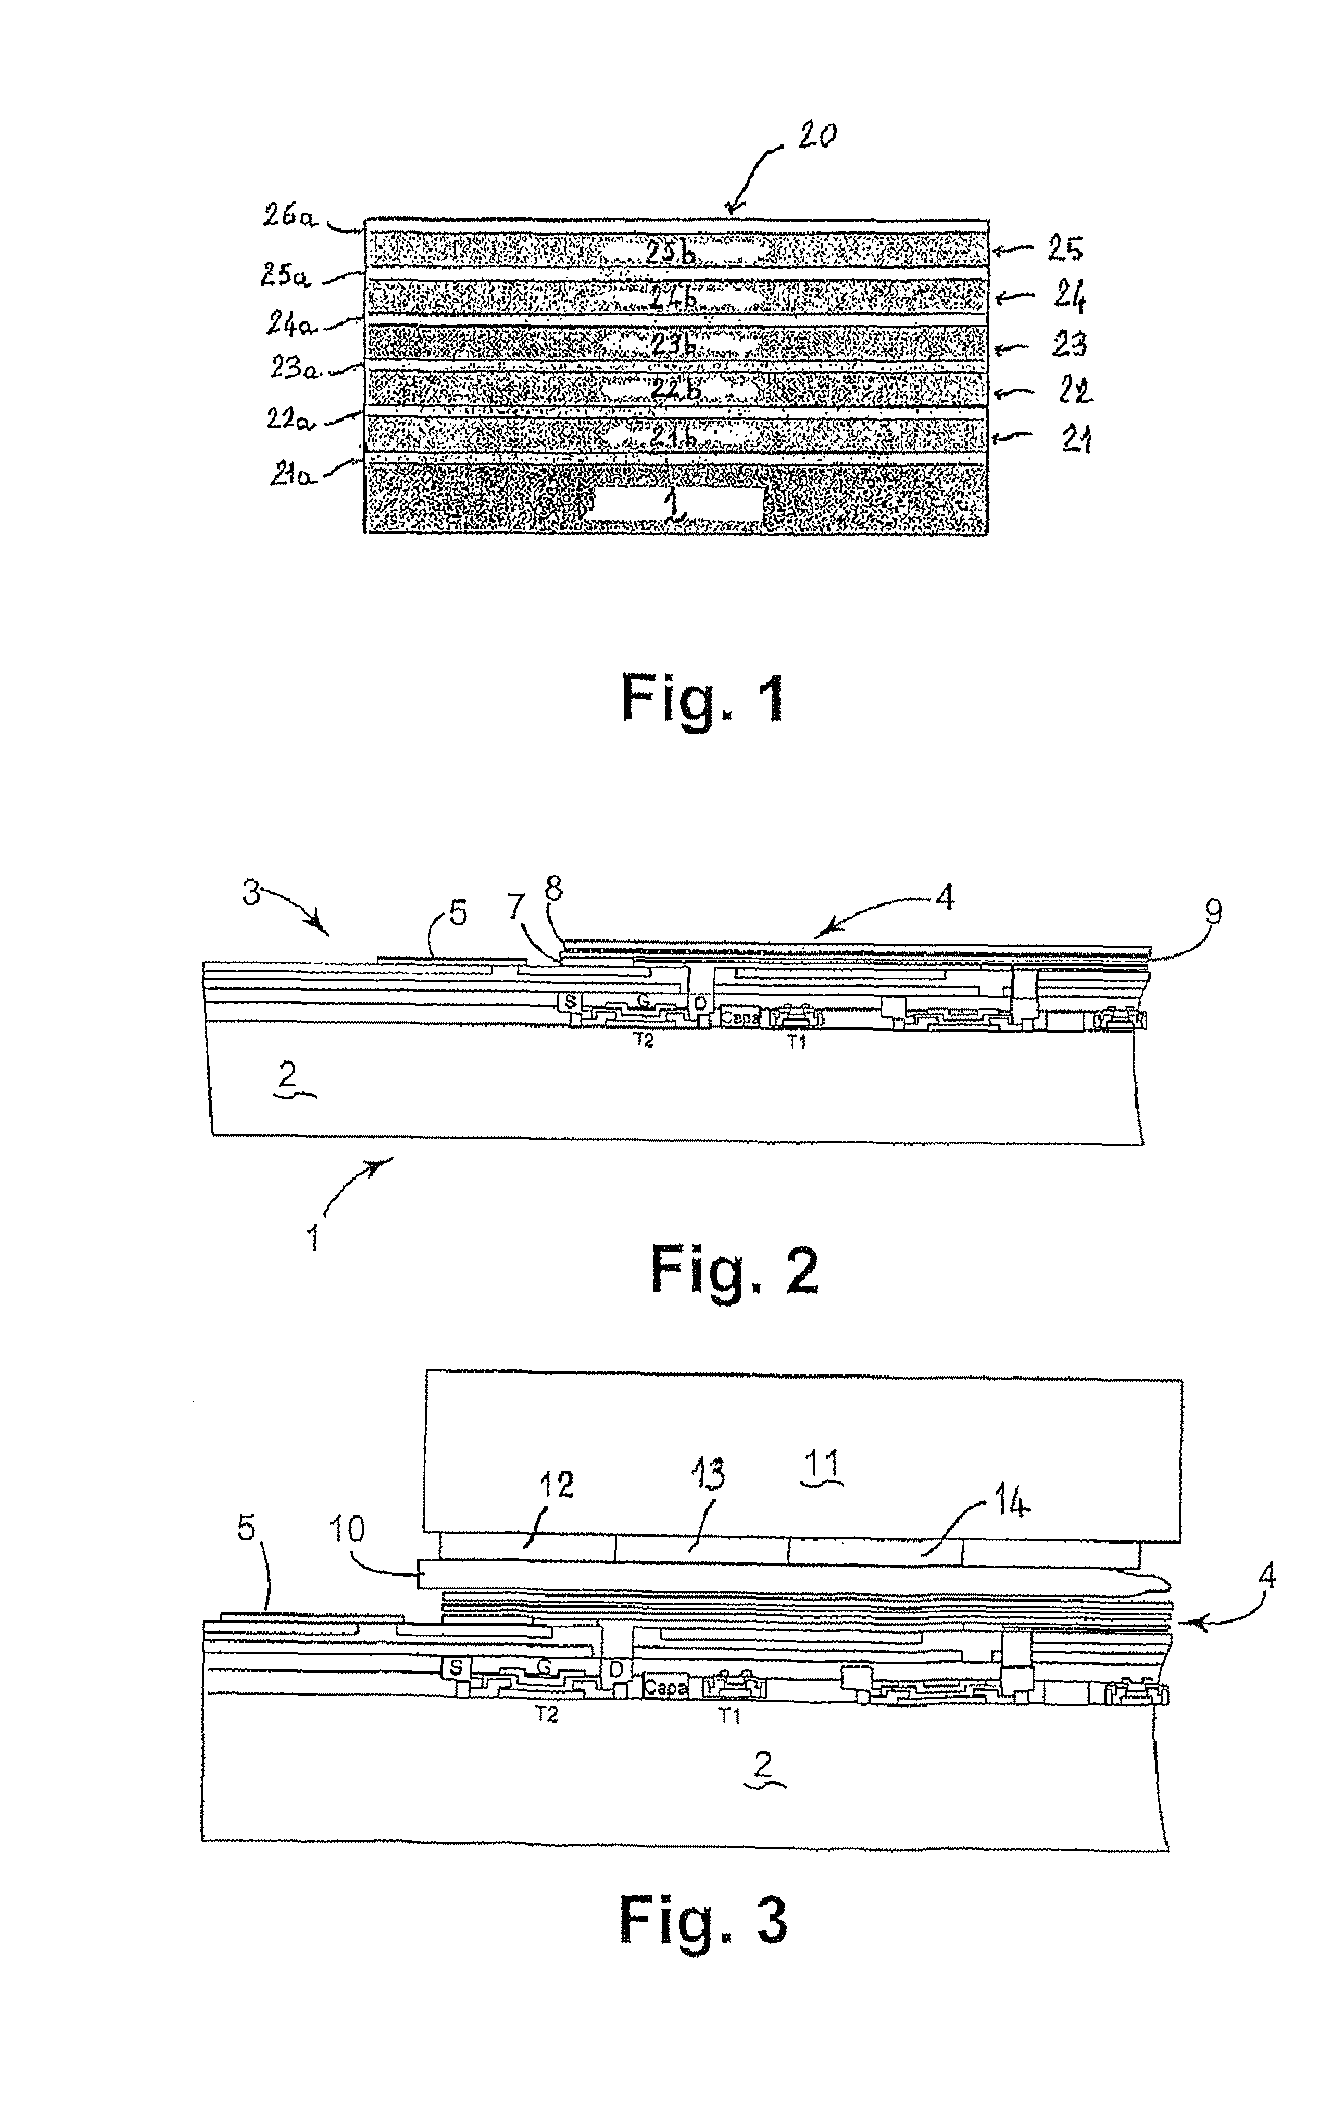 Organic optoelectronic device coated with a multilayer encapsulation structure and a method for encapsulating said device